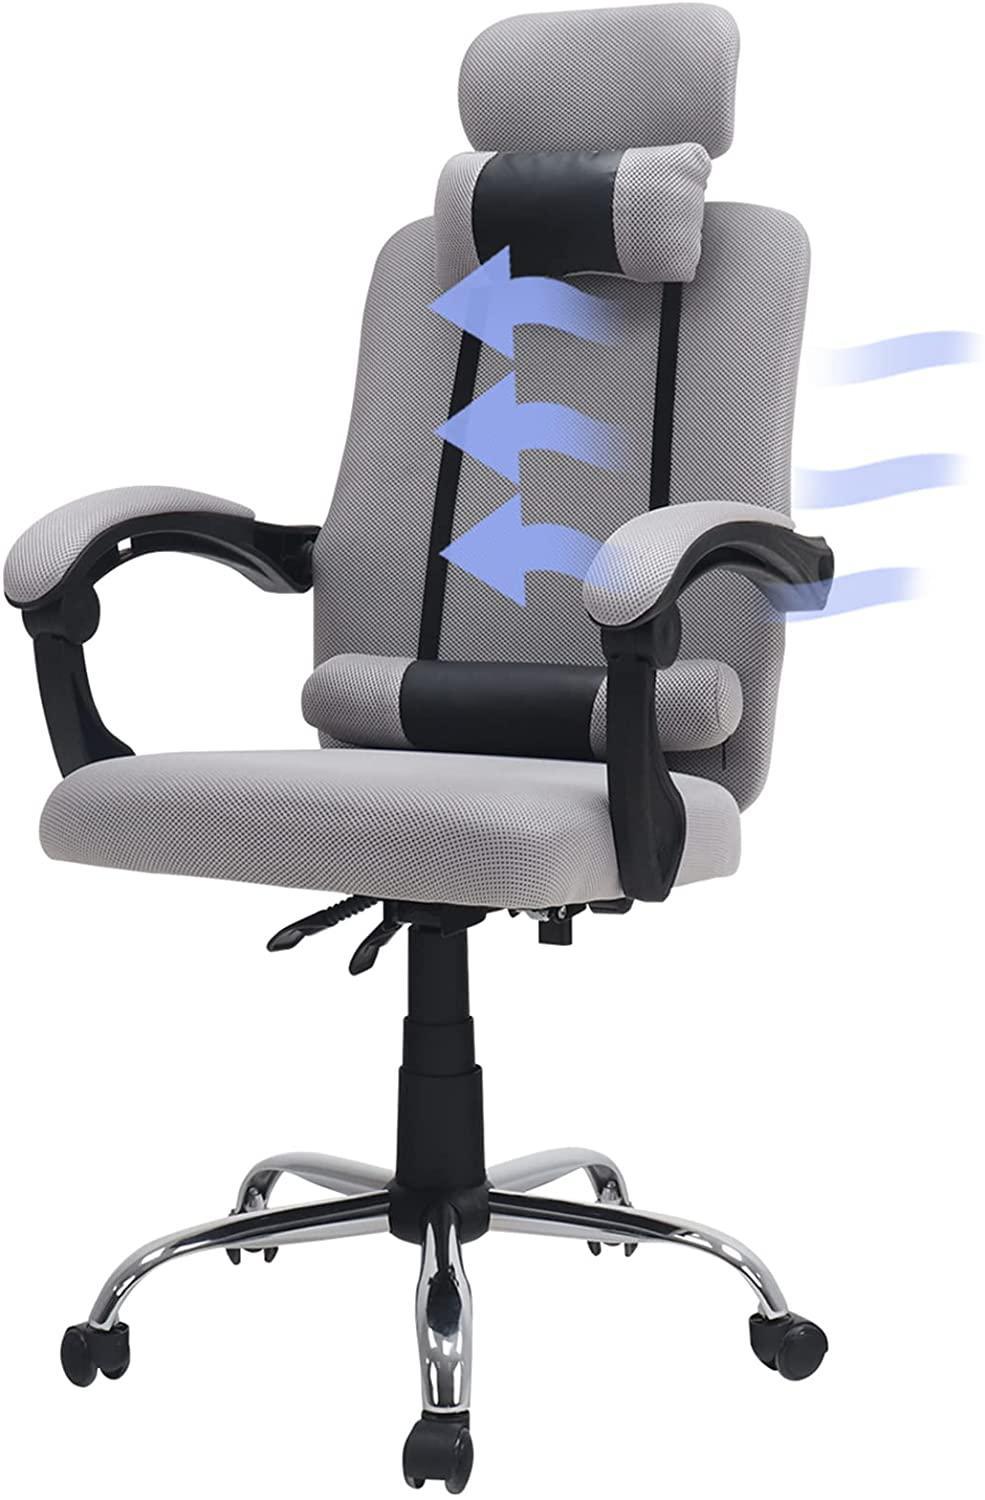 Advwin Mesh Office Chair 135° Ergonomic High Back Computer Chair with Headrest Gray